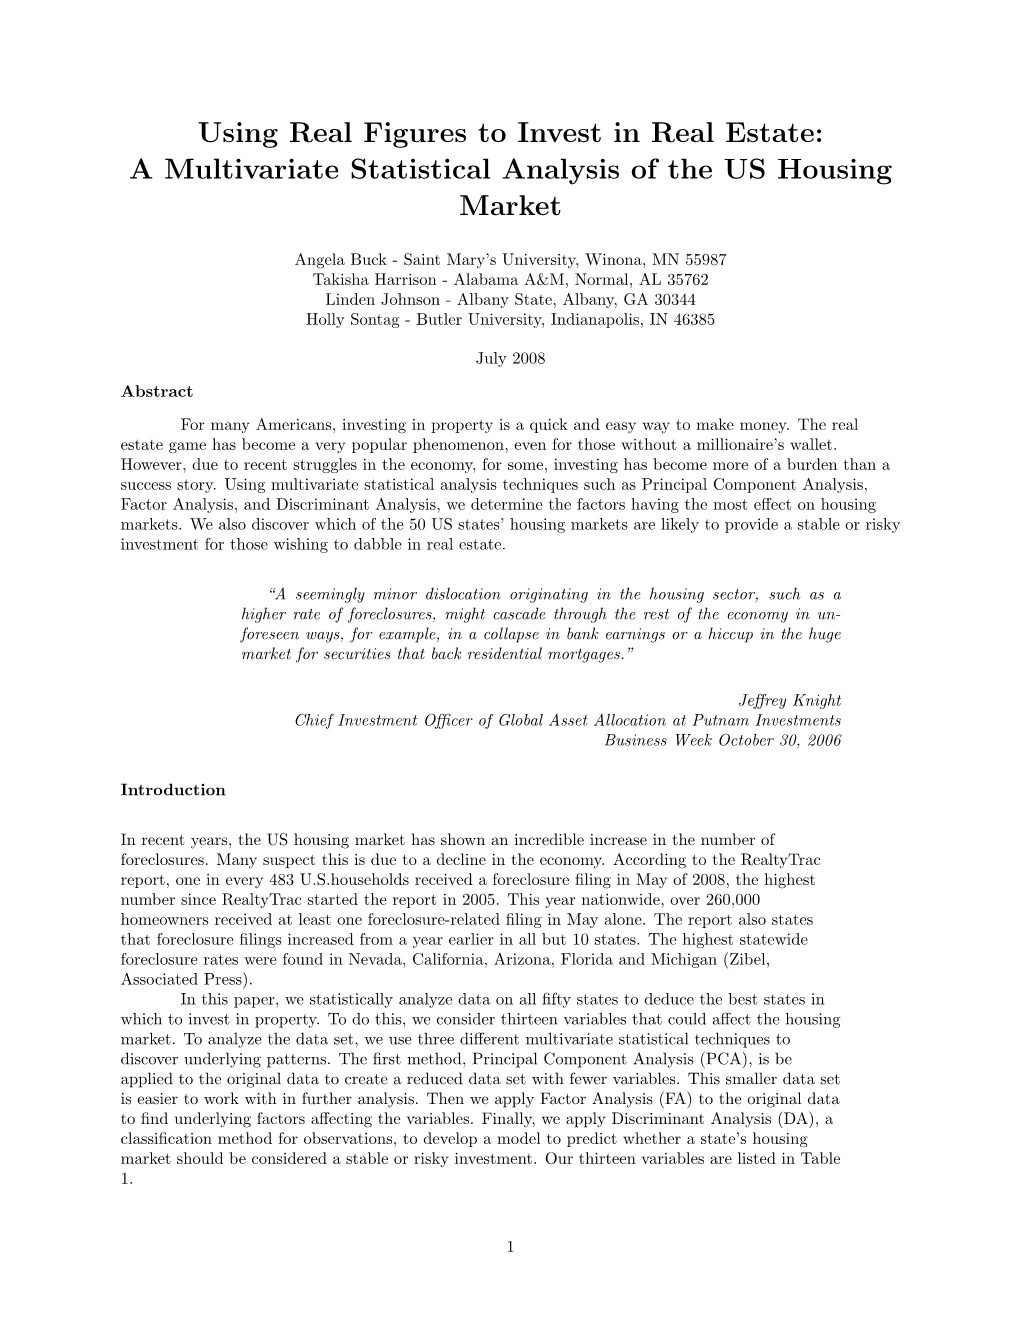 A Multivariate Statistical Analysis of the US Housing Market